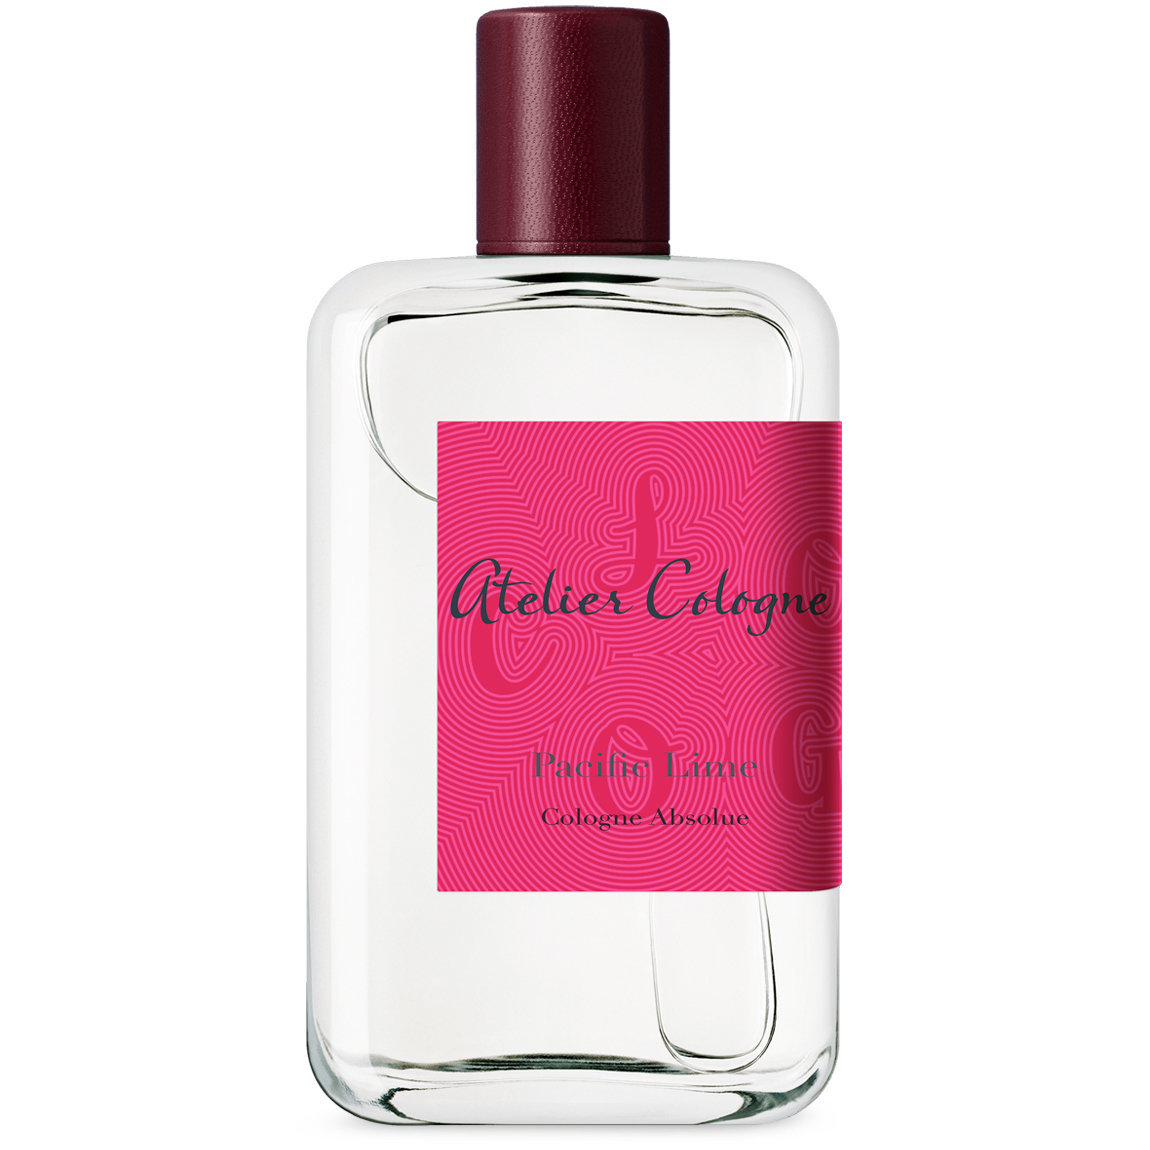 Atelier Cologne Pacific Lime 200 ml alternative view 1 - product swatch.